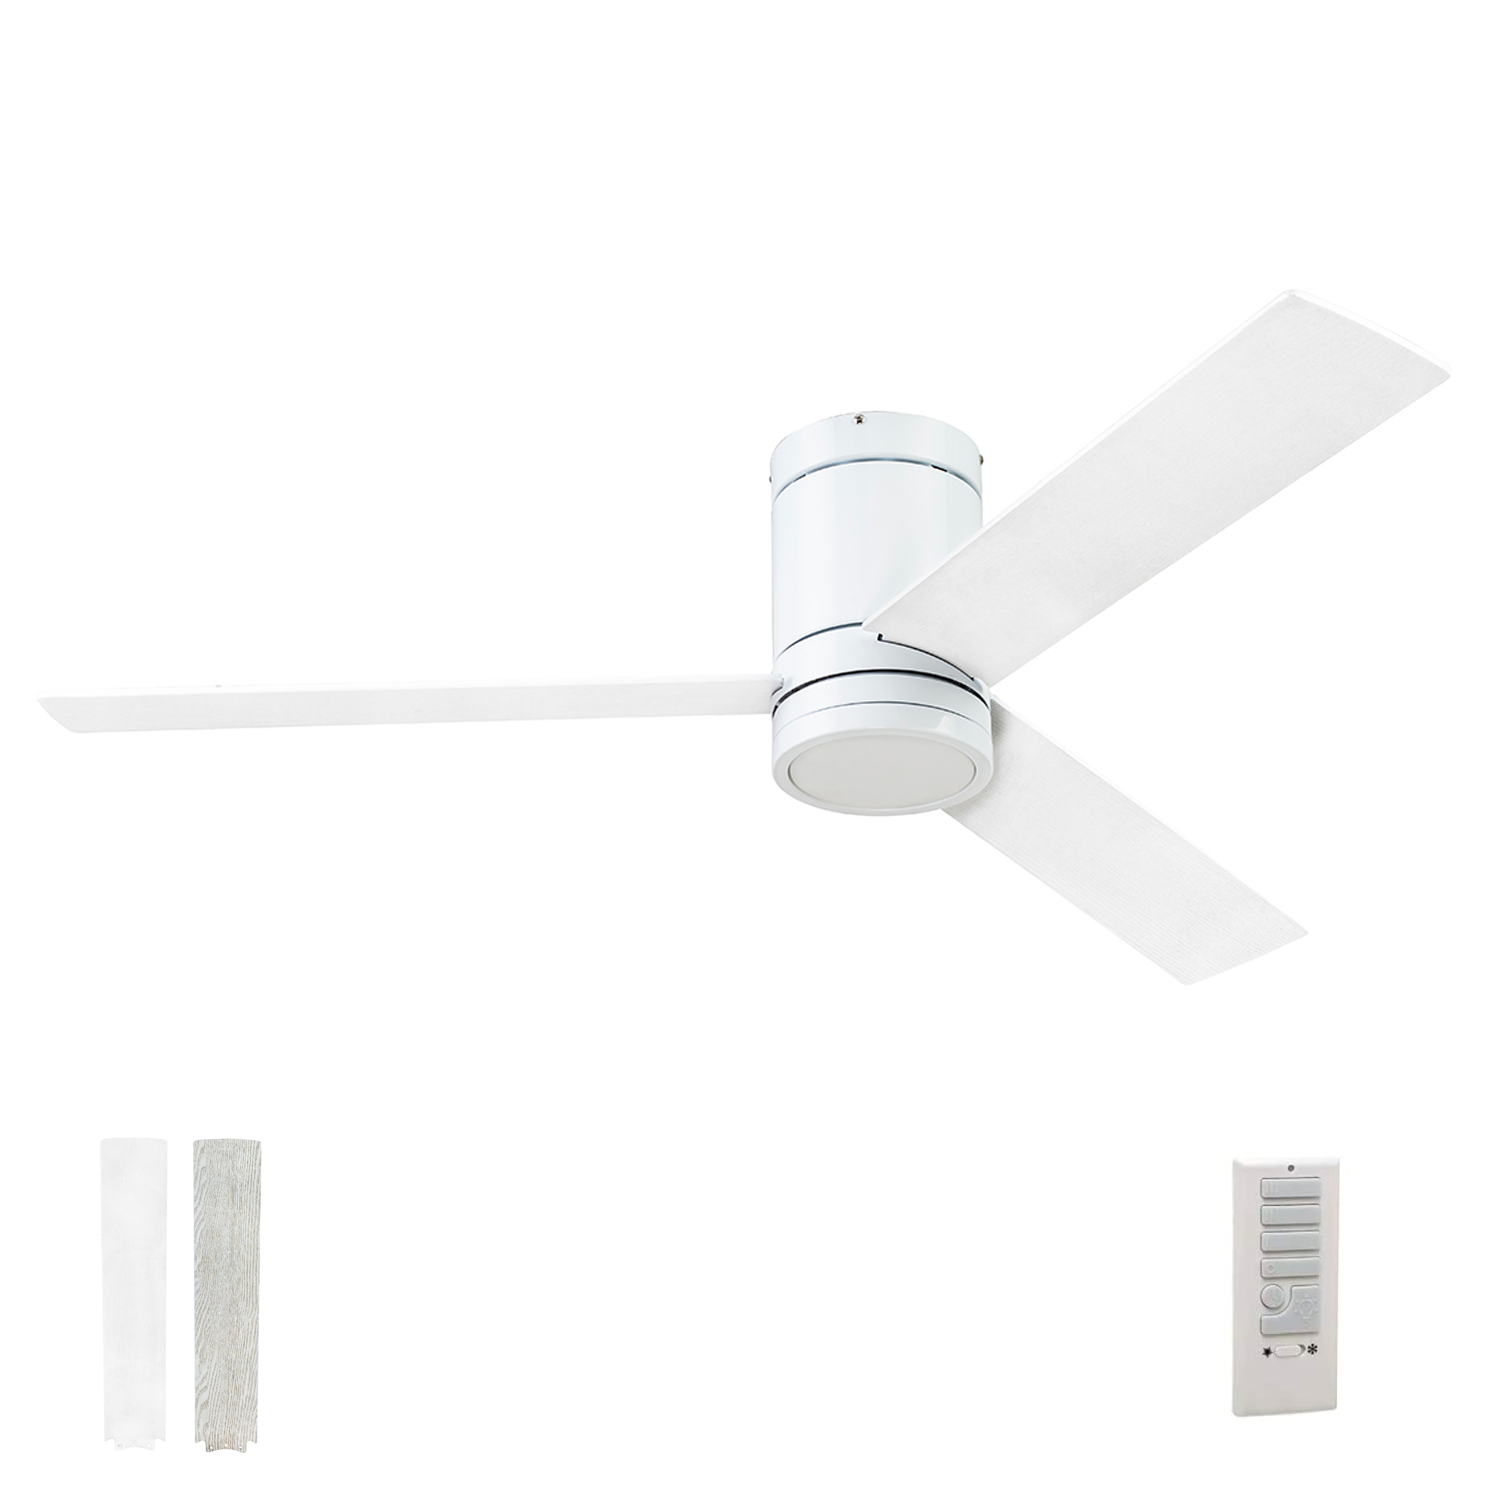 52 Inch Espy, Bright White, Remote Control, Ceiling Fan by Prominence Home